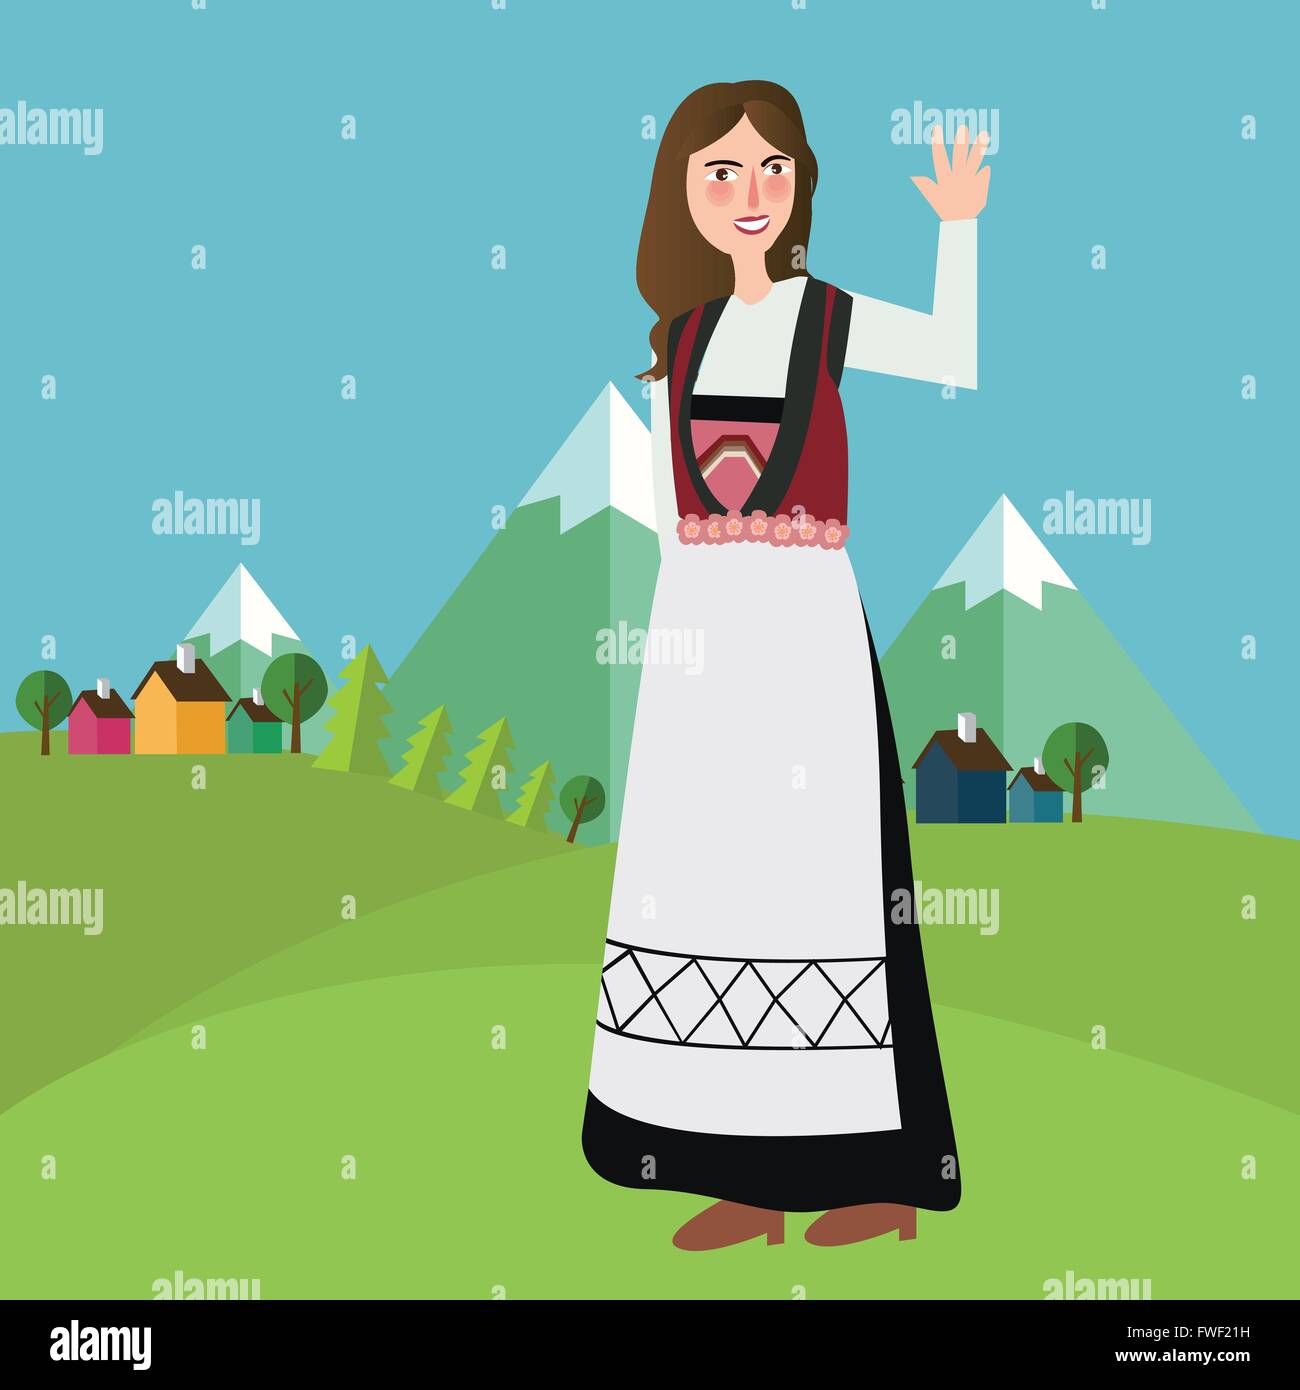 Norwegian Norway Iceland Sweden girls wearing traditional clothes in front of mountain landscape Stock Vector